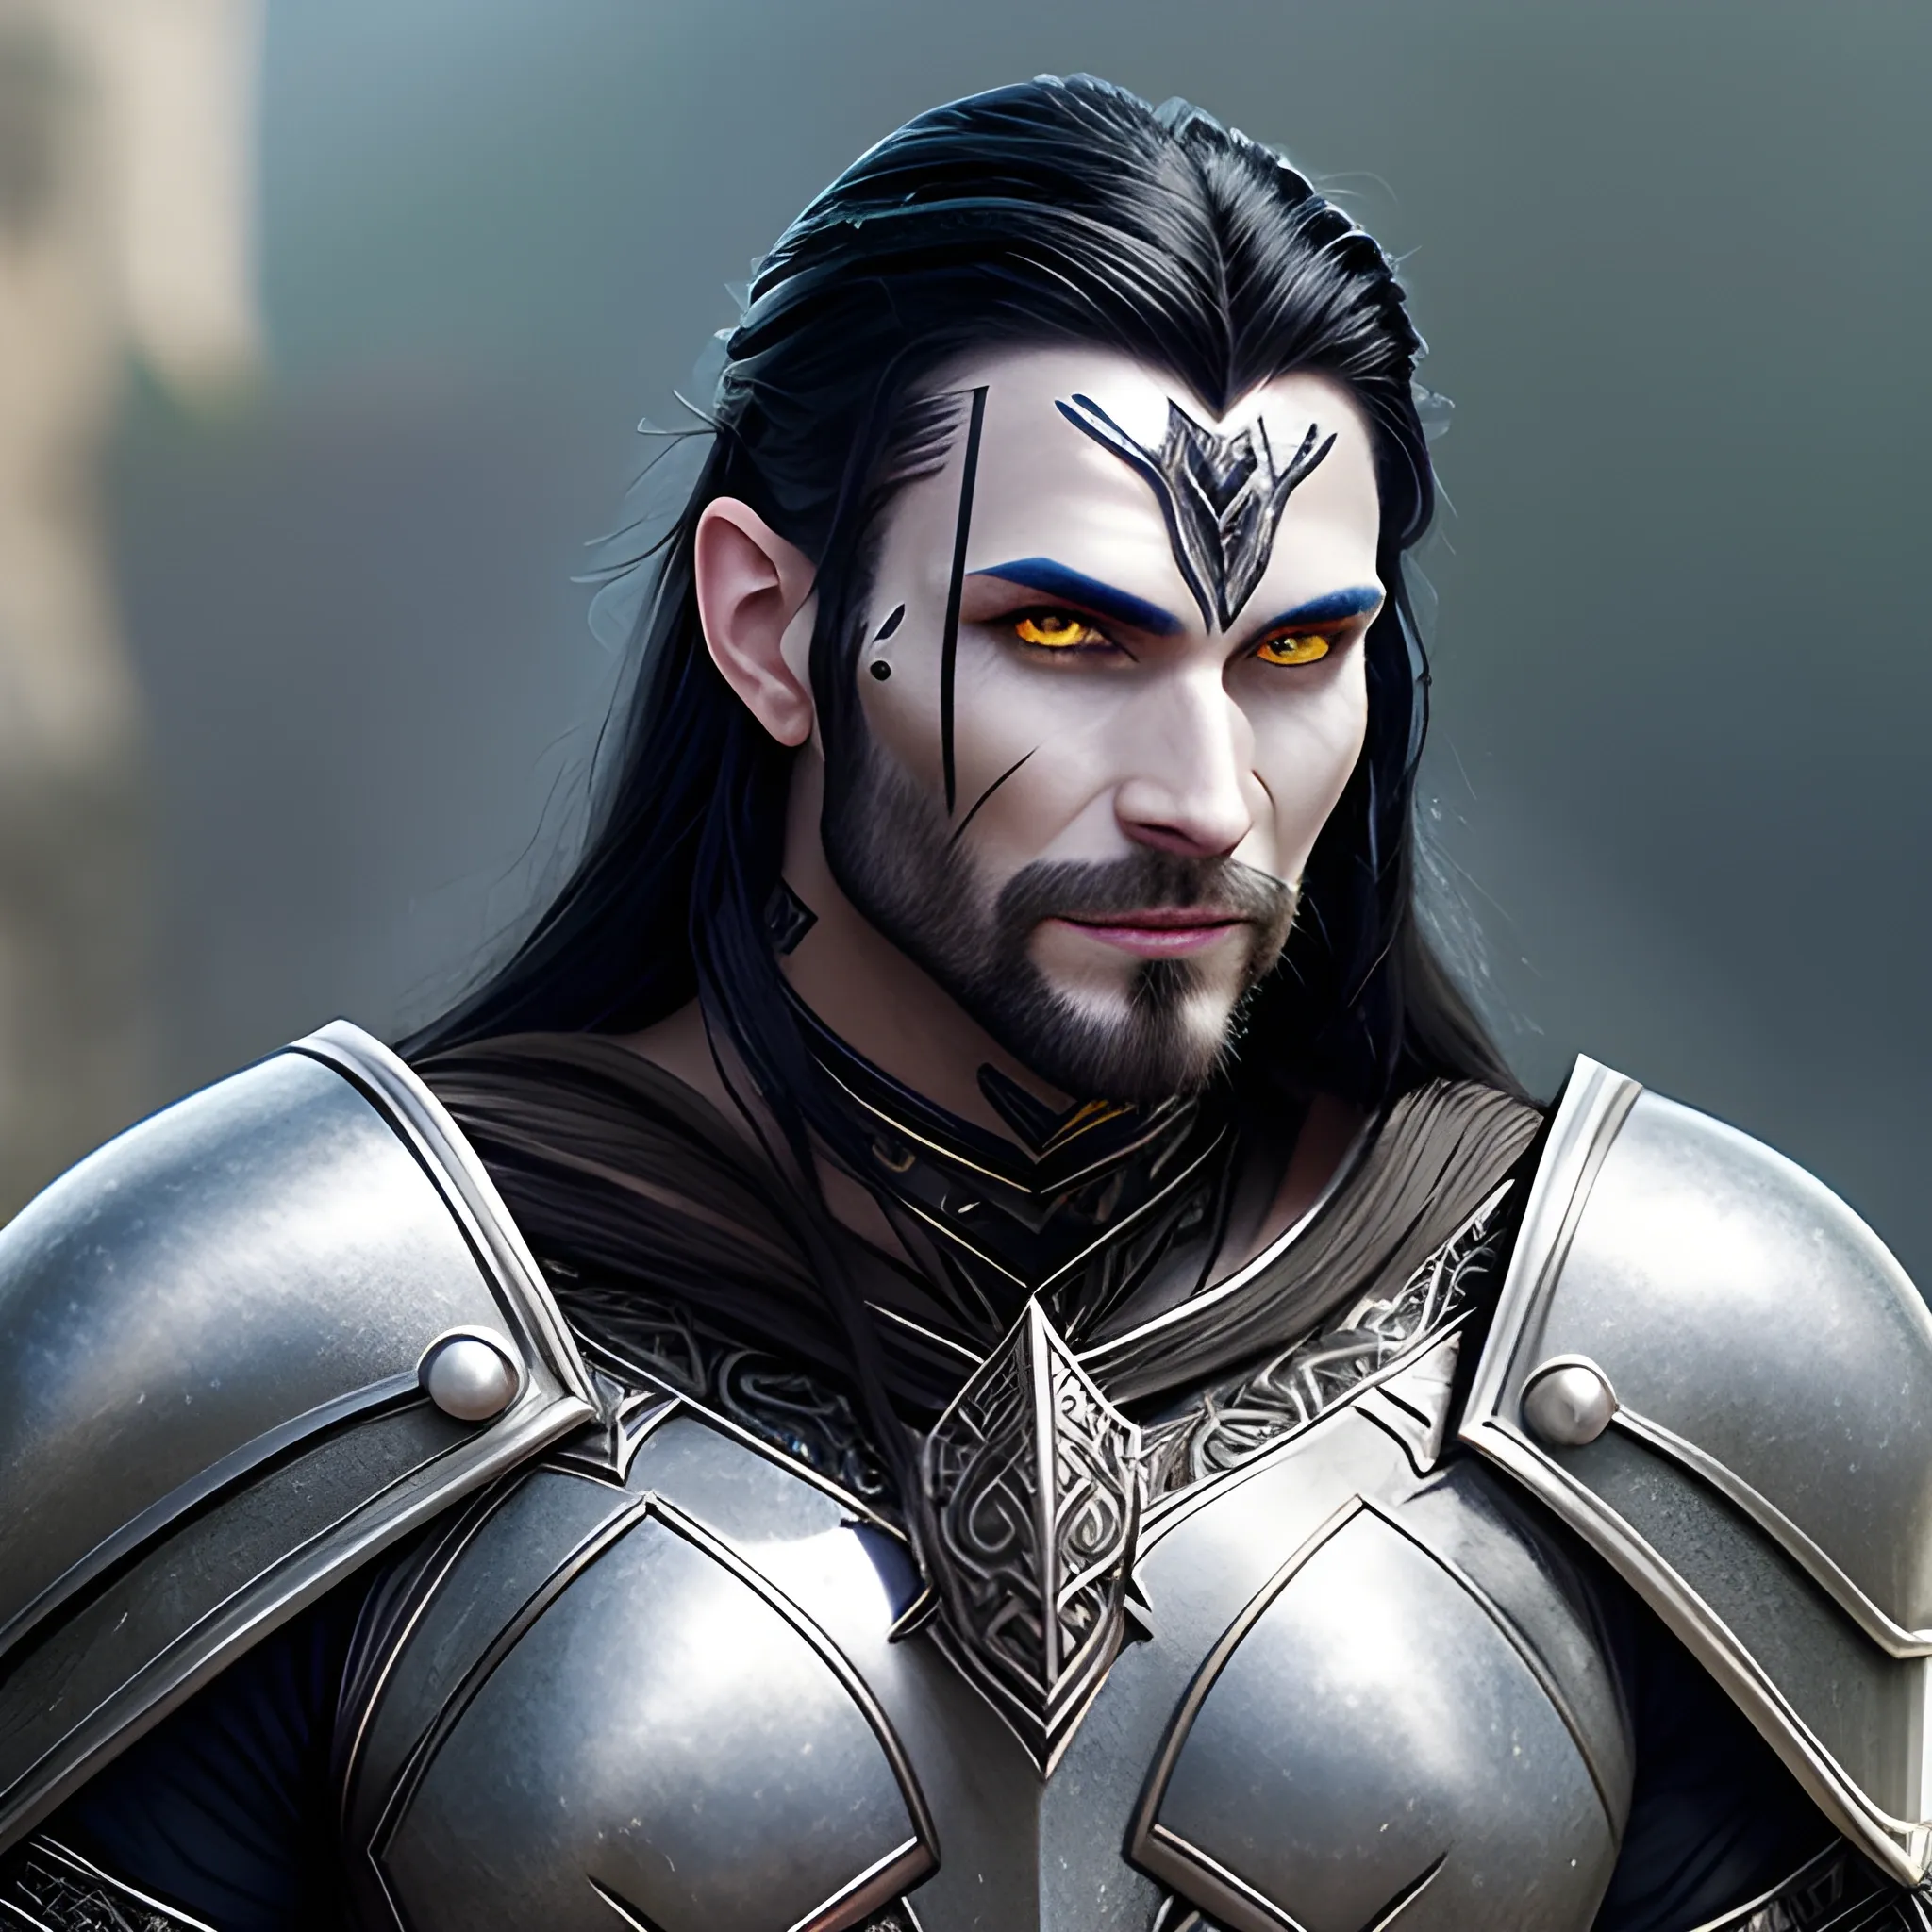 fantasy, paladin, warrior, metal skin, male, long black hair, icy eyes, blue eyes, intricate light silver armor, smiling, hyper realistic, dungeons and dragons, strong, armed, black hair, Oil Painting, filigree skin, silver skin, silver flame necklace, grey skin, iron skin, platinum skin, human ears, Oil Painting, young, handsome, thin tribal facial tattoos, steel eyes, face tattoo, face scarring, aluminium skin, friendly, no helmet, happy, confident, black hair, grinning, good, warhammer, bust, generous